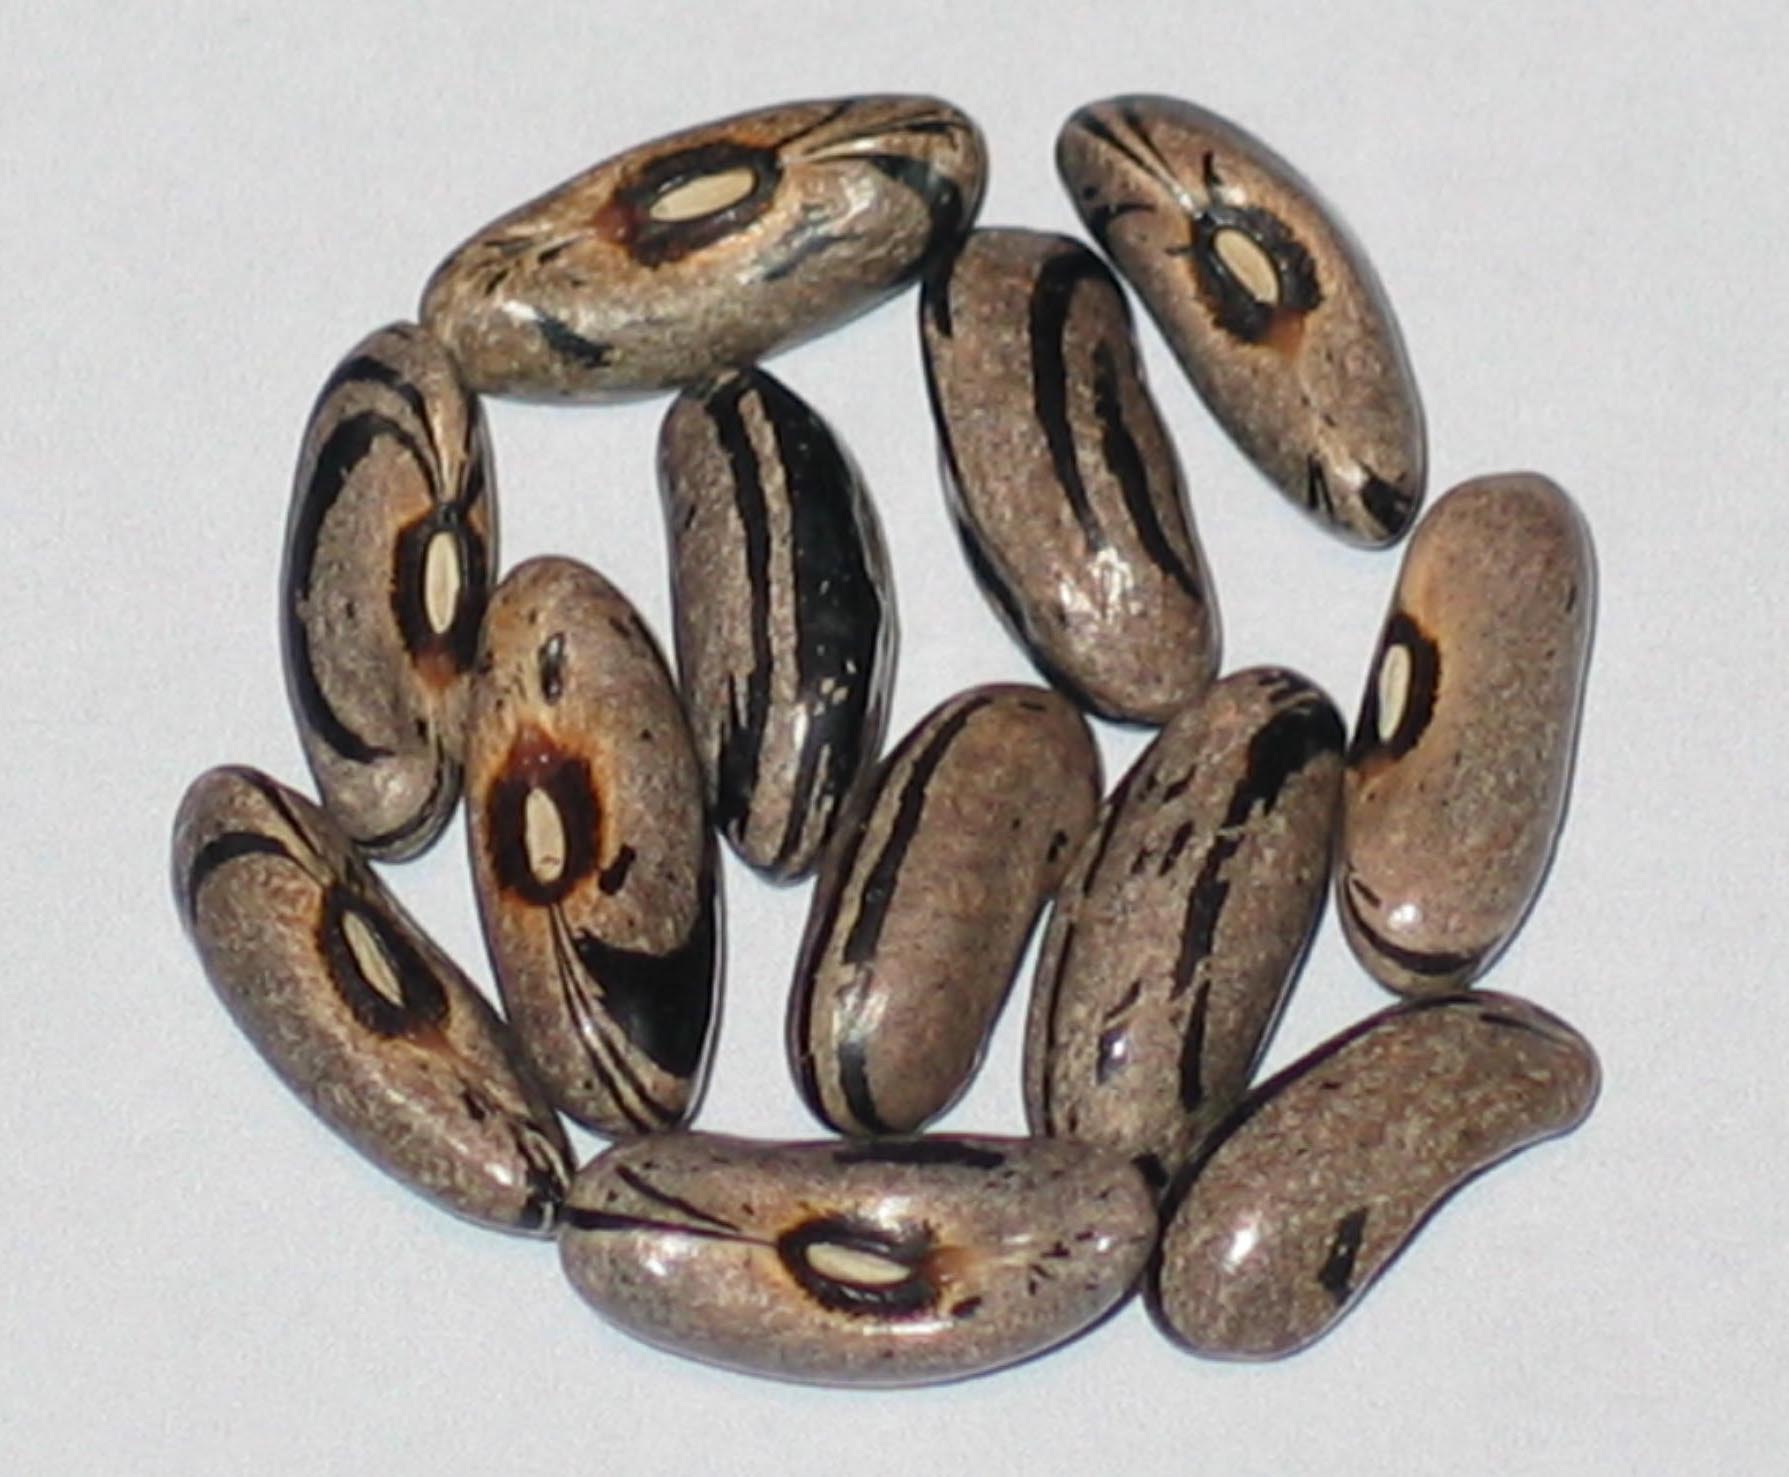 image of Wesley Railroad Spike beans